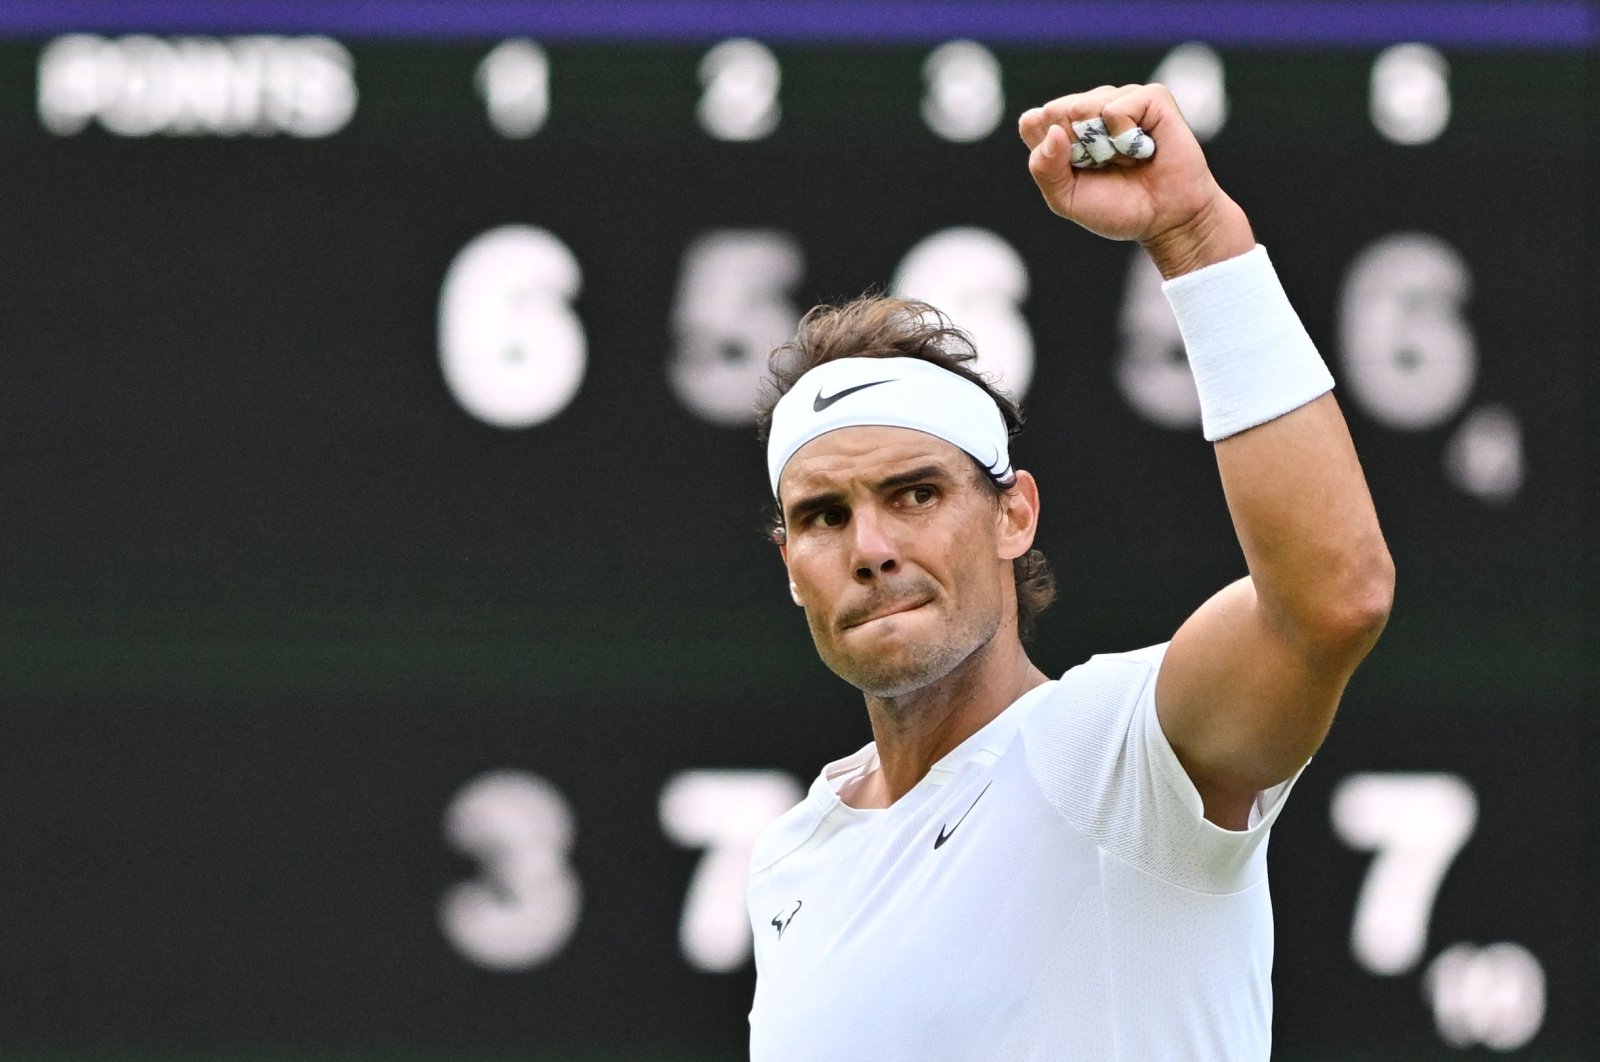 Spain&#039;s Rafael Nadal celebrates after winning his men&#039;s singles quarterfinal tennis match during the 2022 Wimbledon Championships at The All England Tennis Club in Wimbledon, southwest London, U.K., July 6, 2022. (AFP Photo)